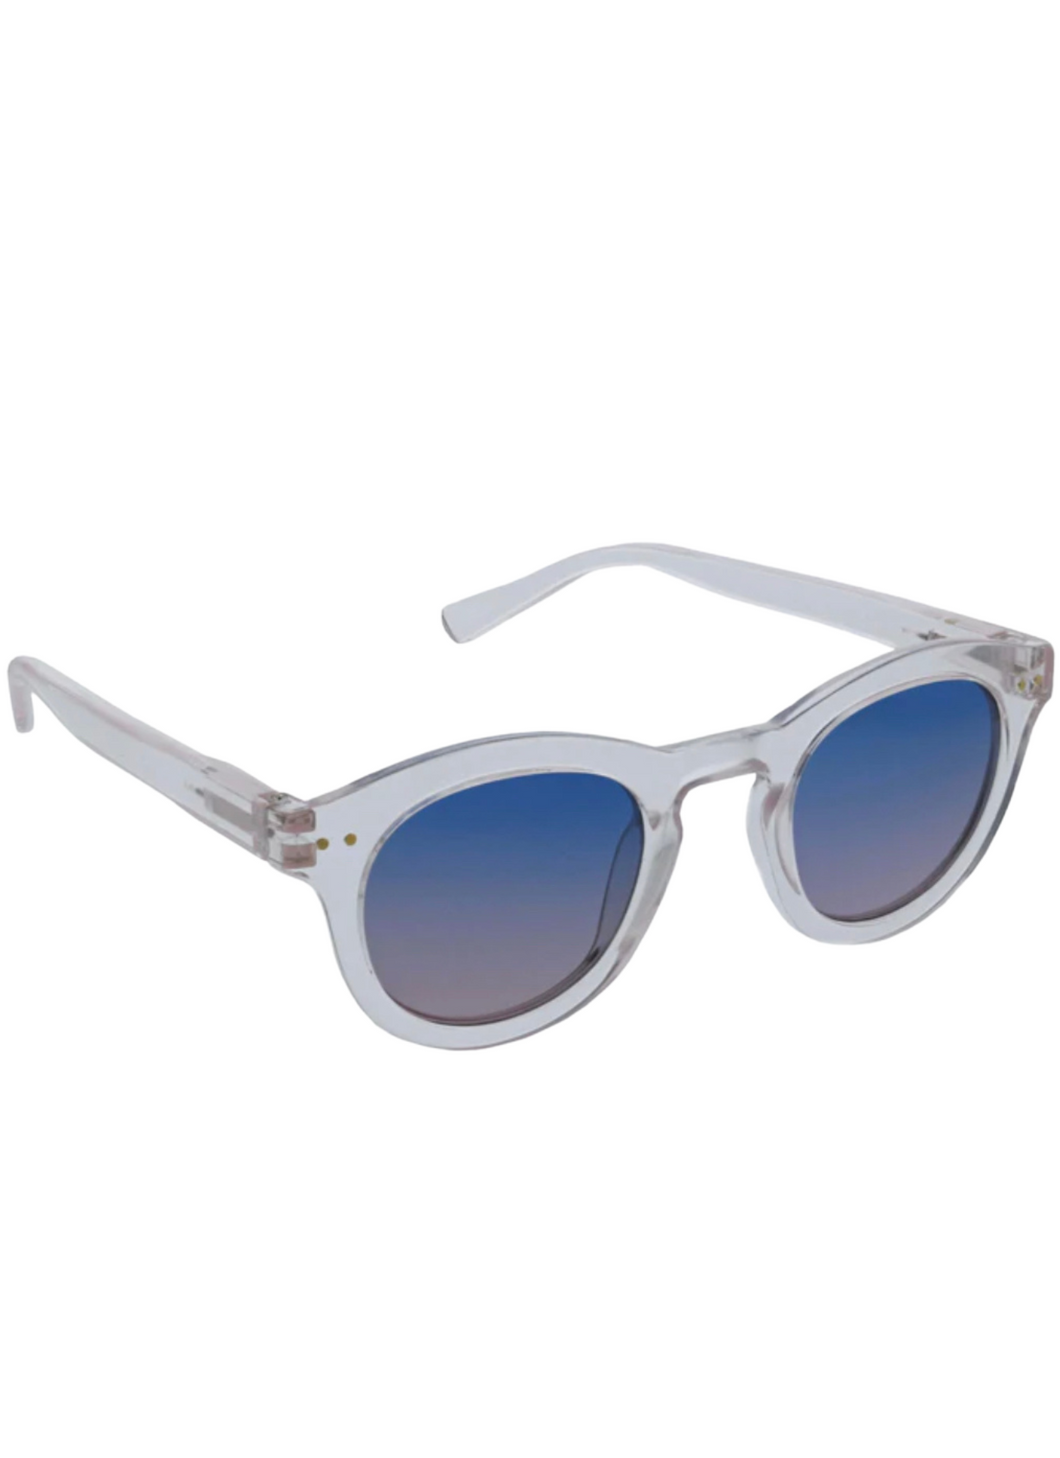 Diego Sunglasses - Clear Iridescent